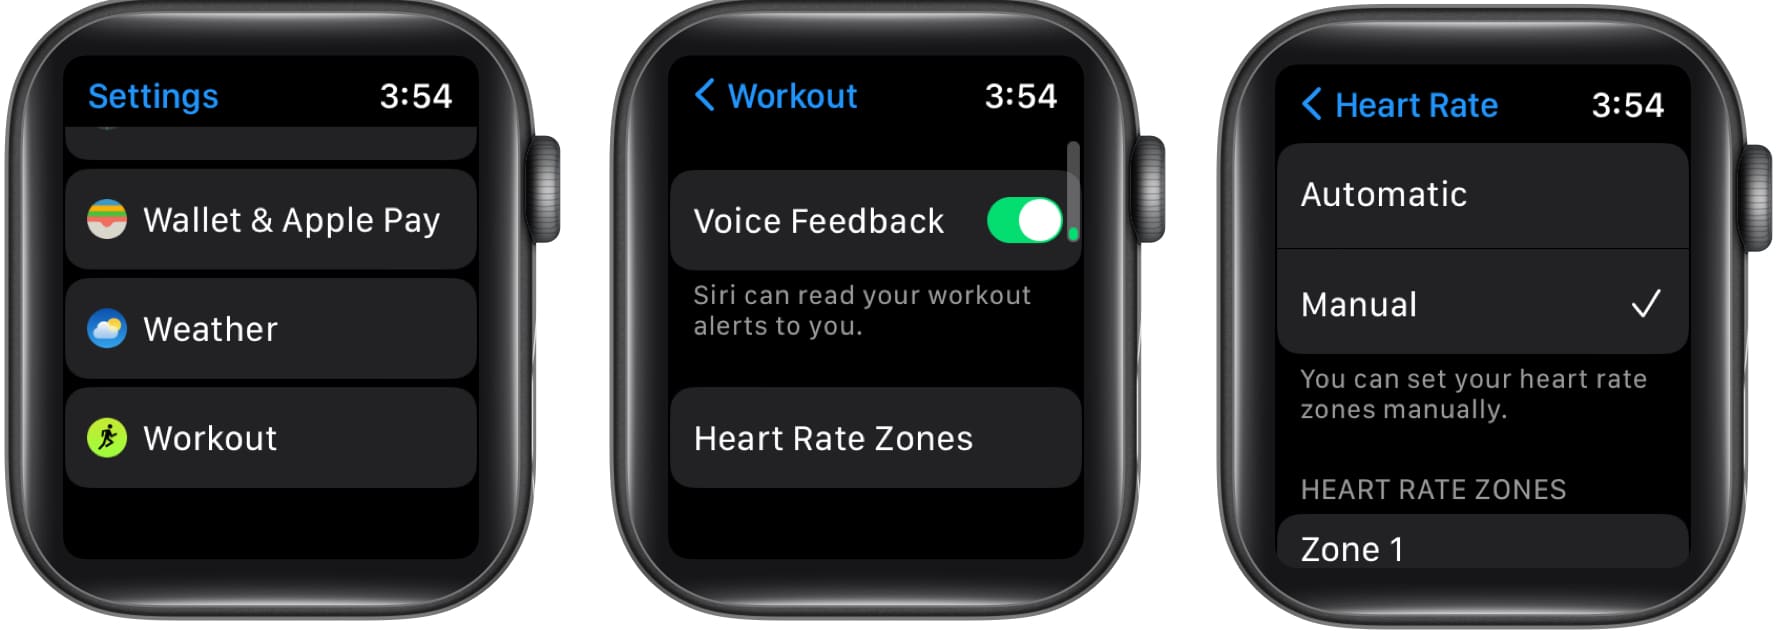 Tap Manual in Heart Rate on Apple Watch